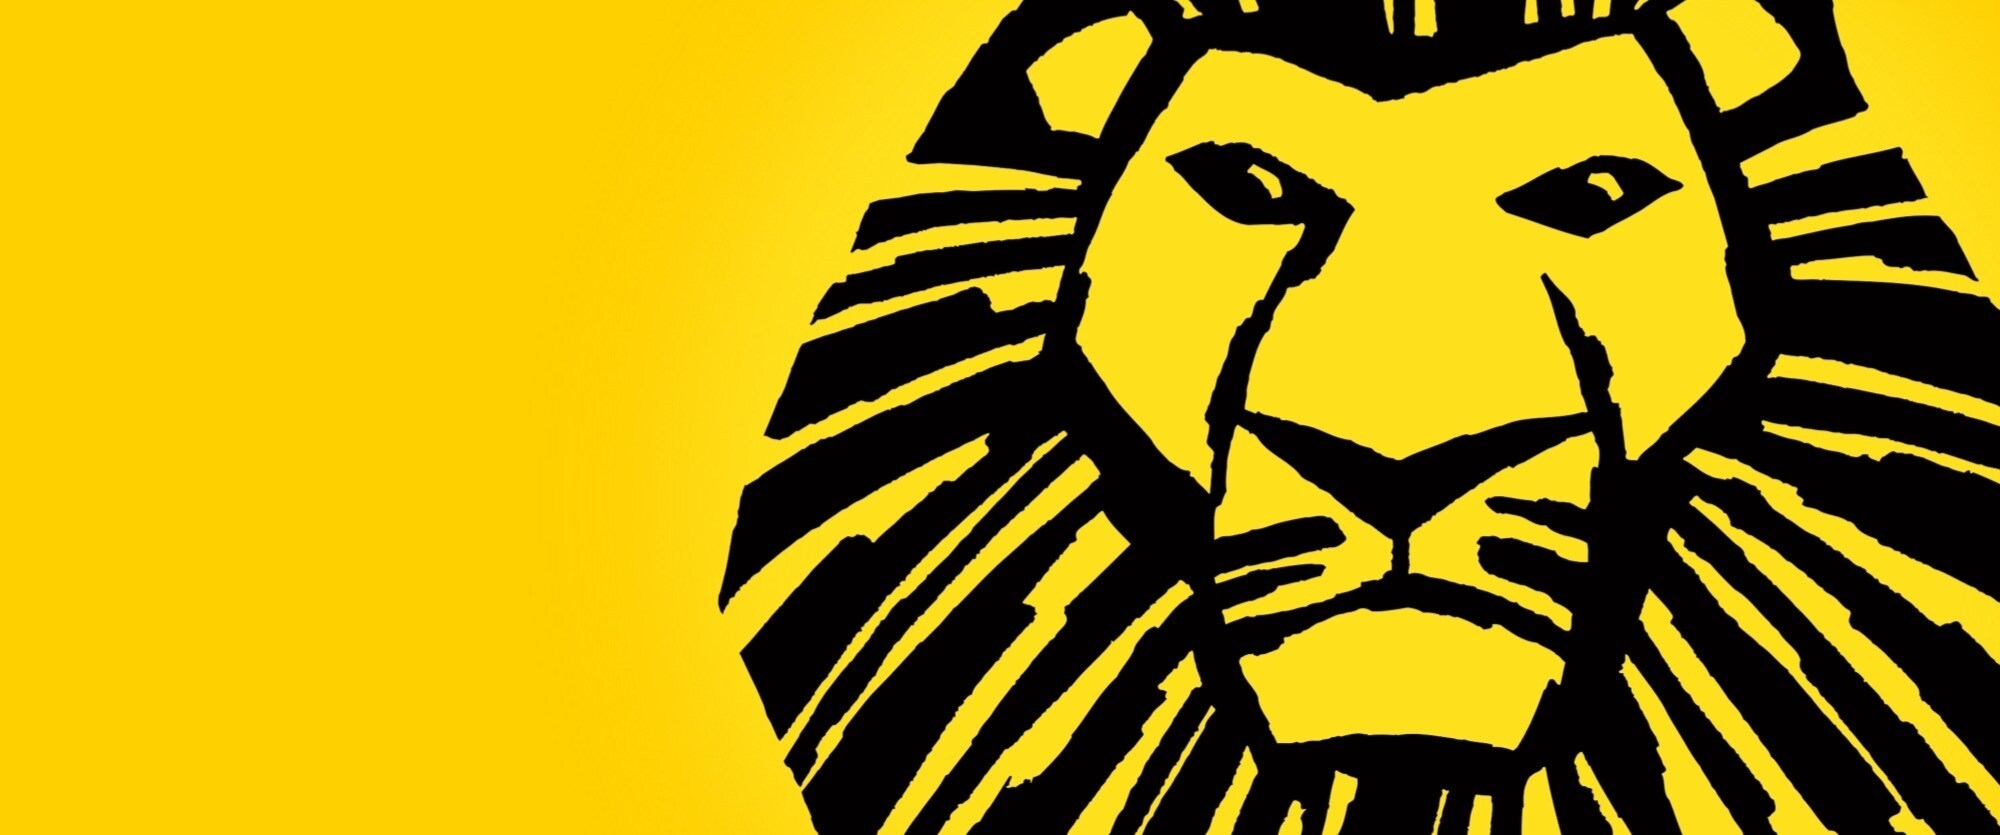 The Lion King Tour UK 2021 Dates & Tickets Book with Disney